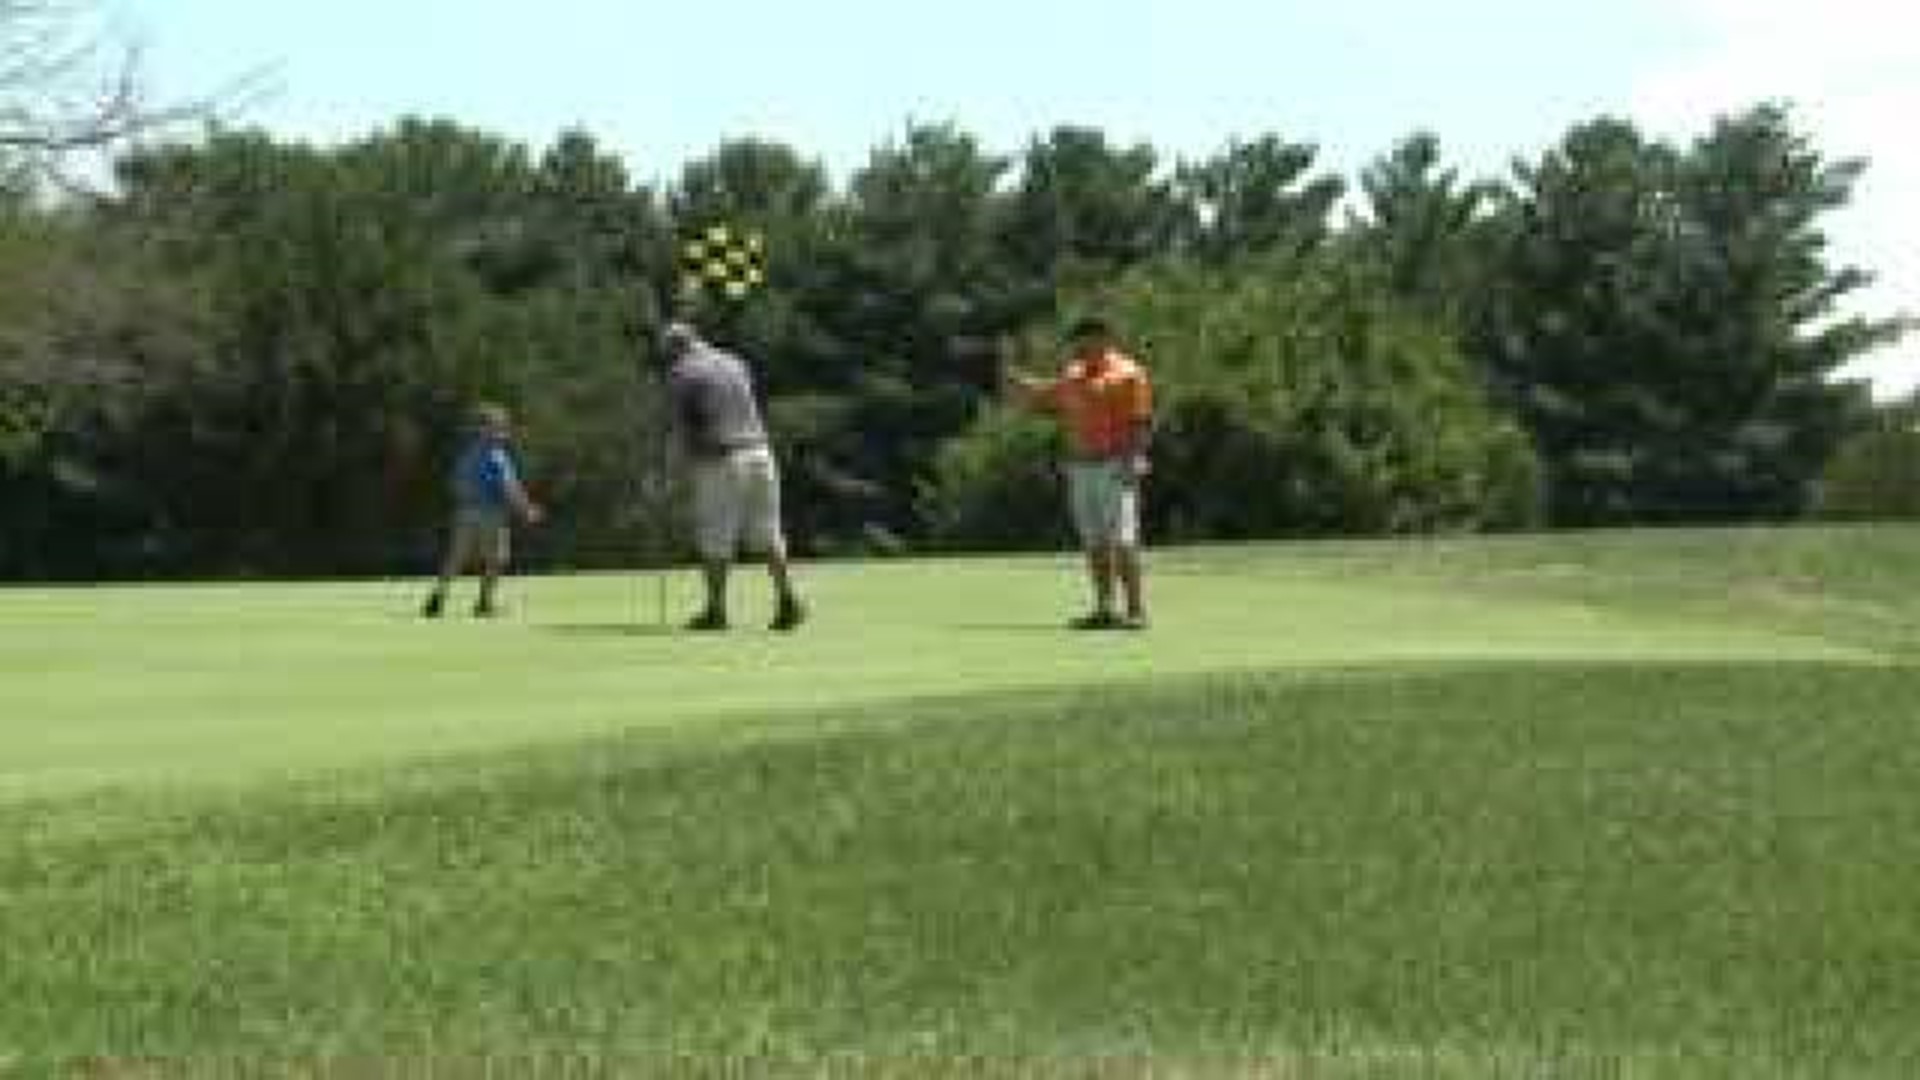 Thomson golf course reopens as Sand Burr Run